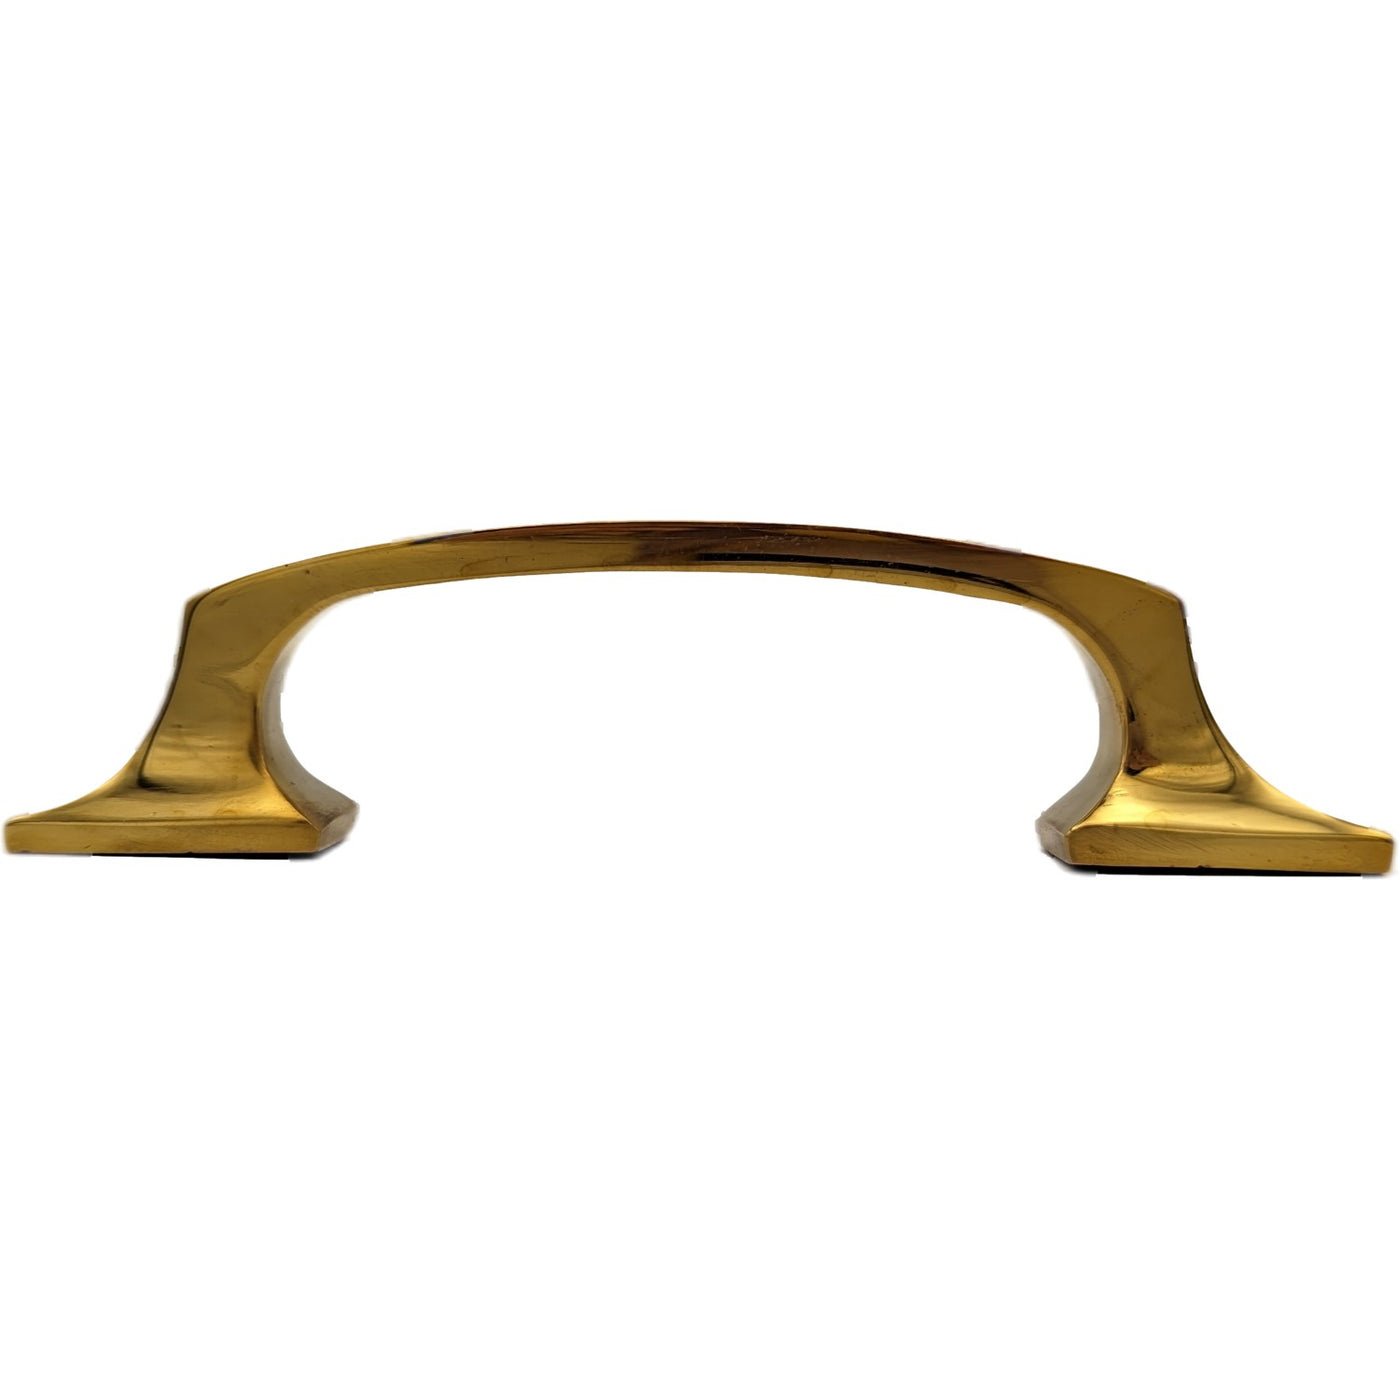 5 1/4 Inch Overall (3 3/4 Inch c-c) Traditional Solid Brass Pull